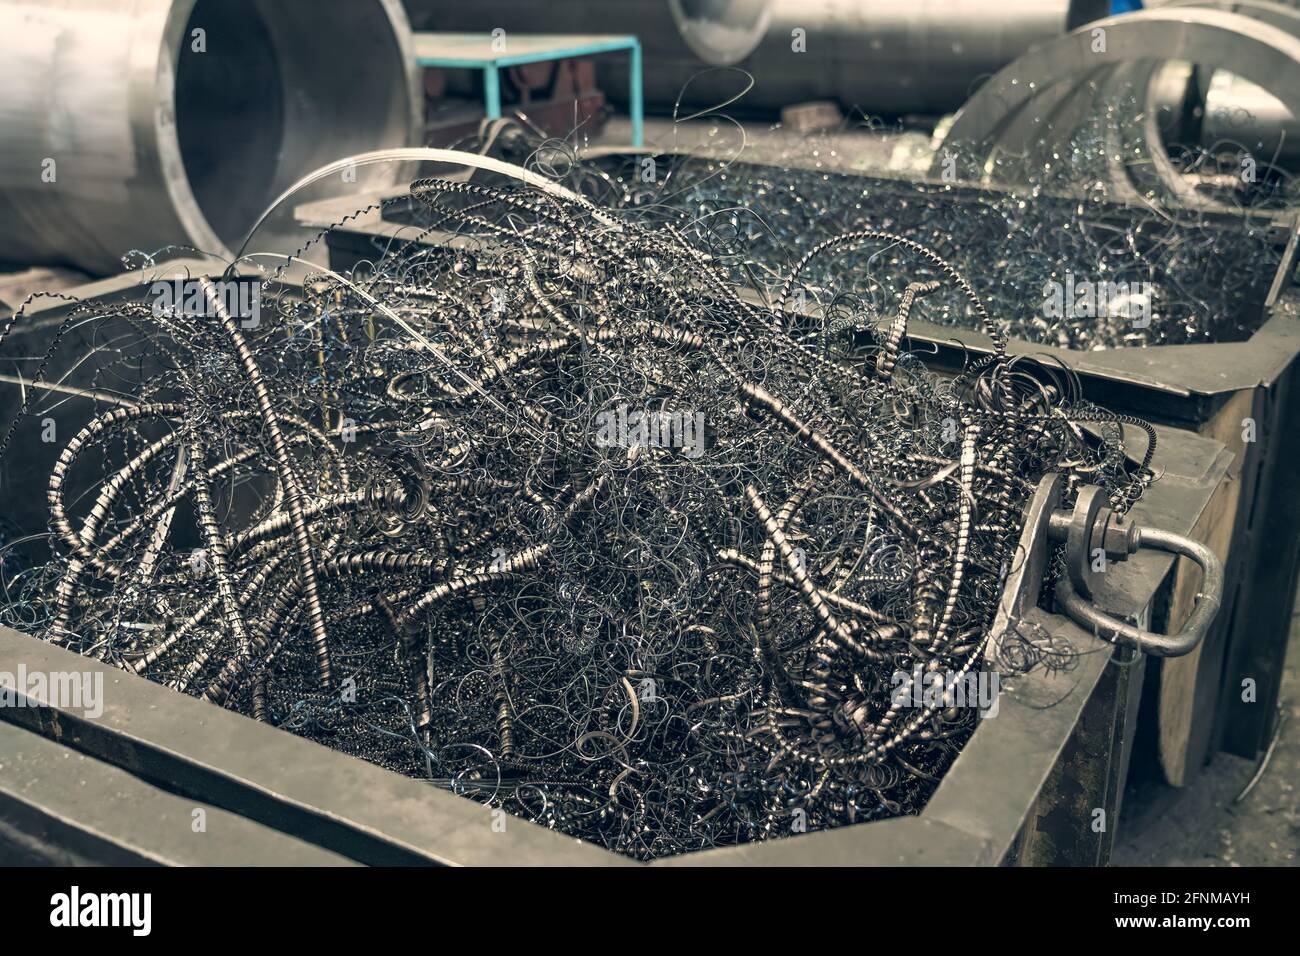 Metal shavings or scrap metal waste steel for recycling in container in factory. Stock Photo